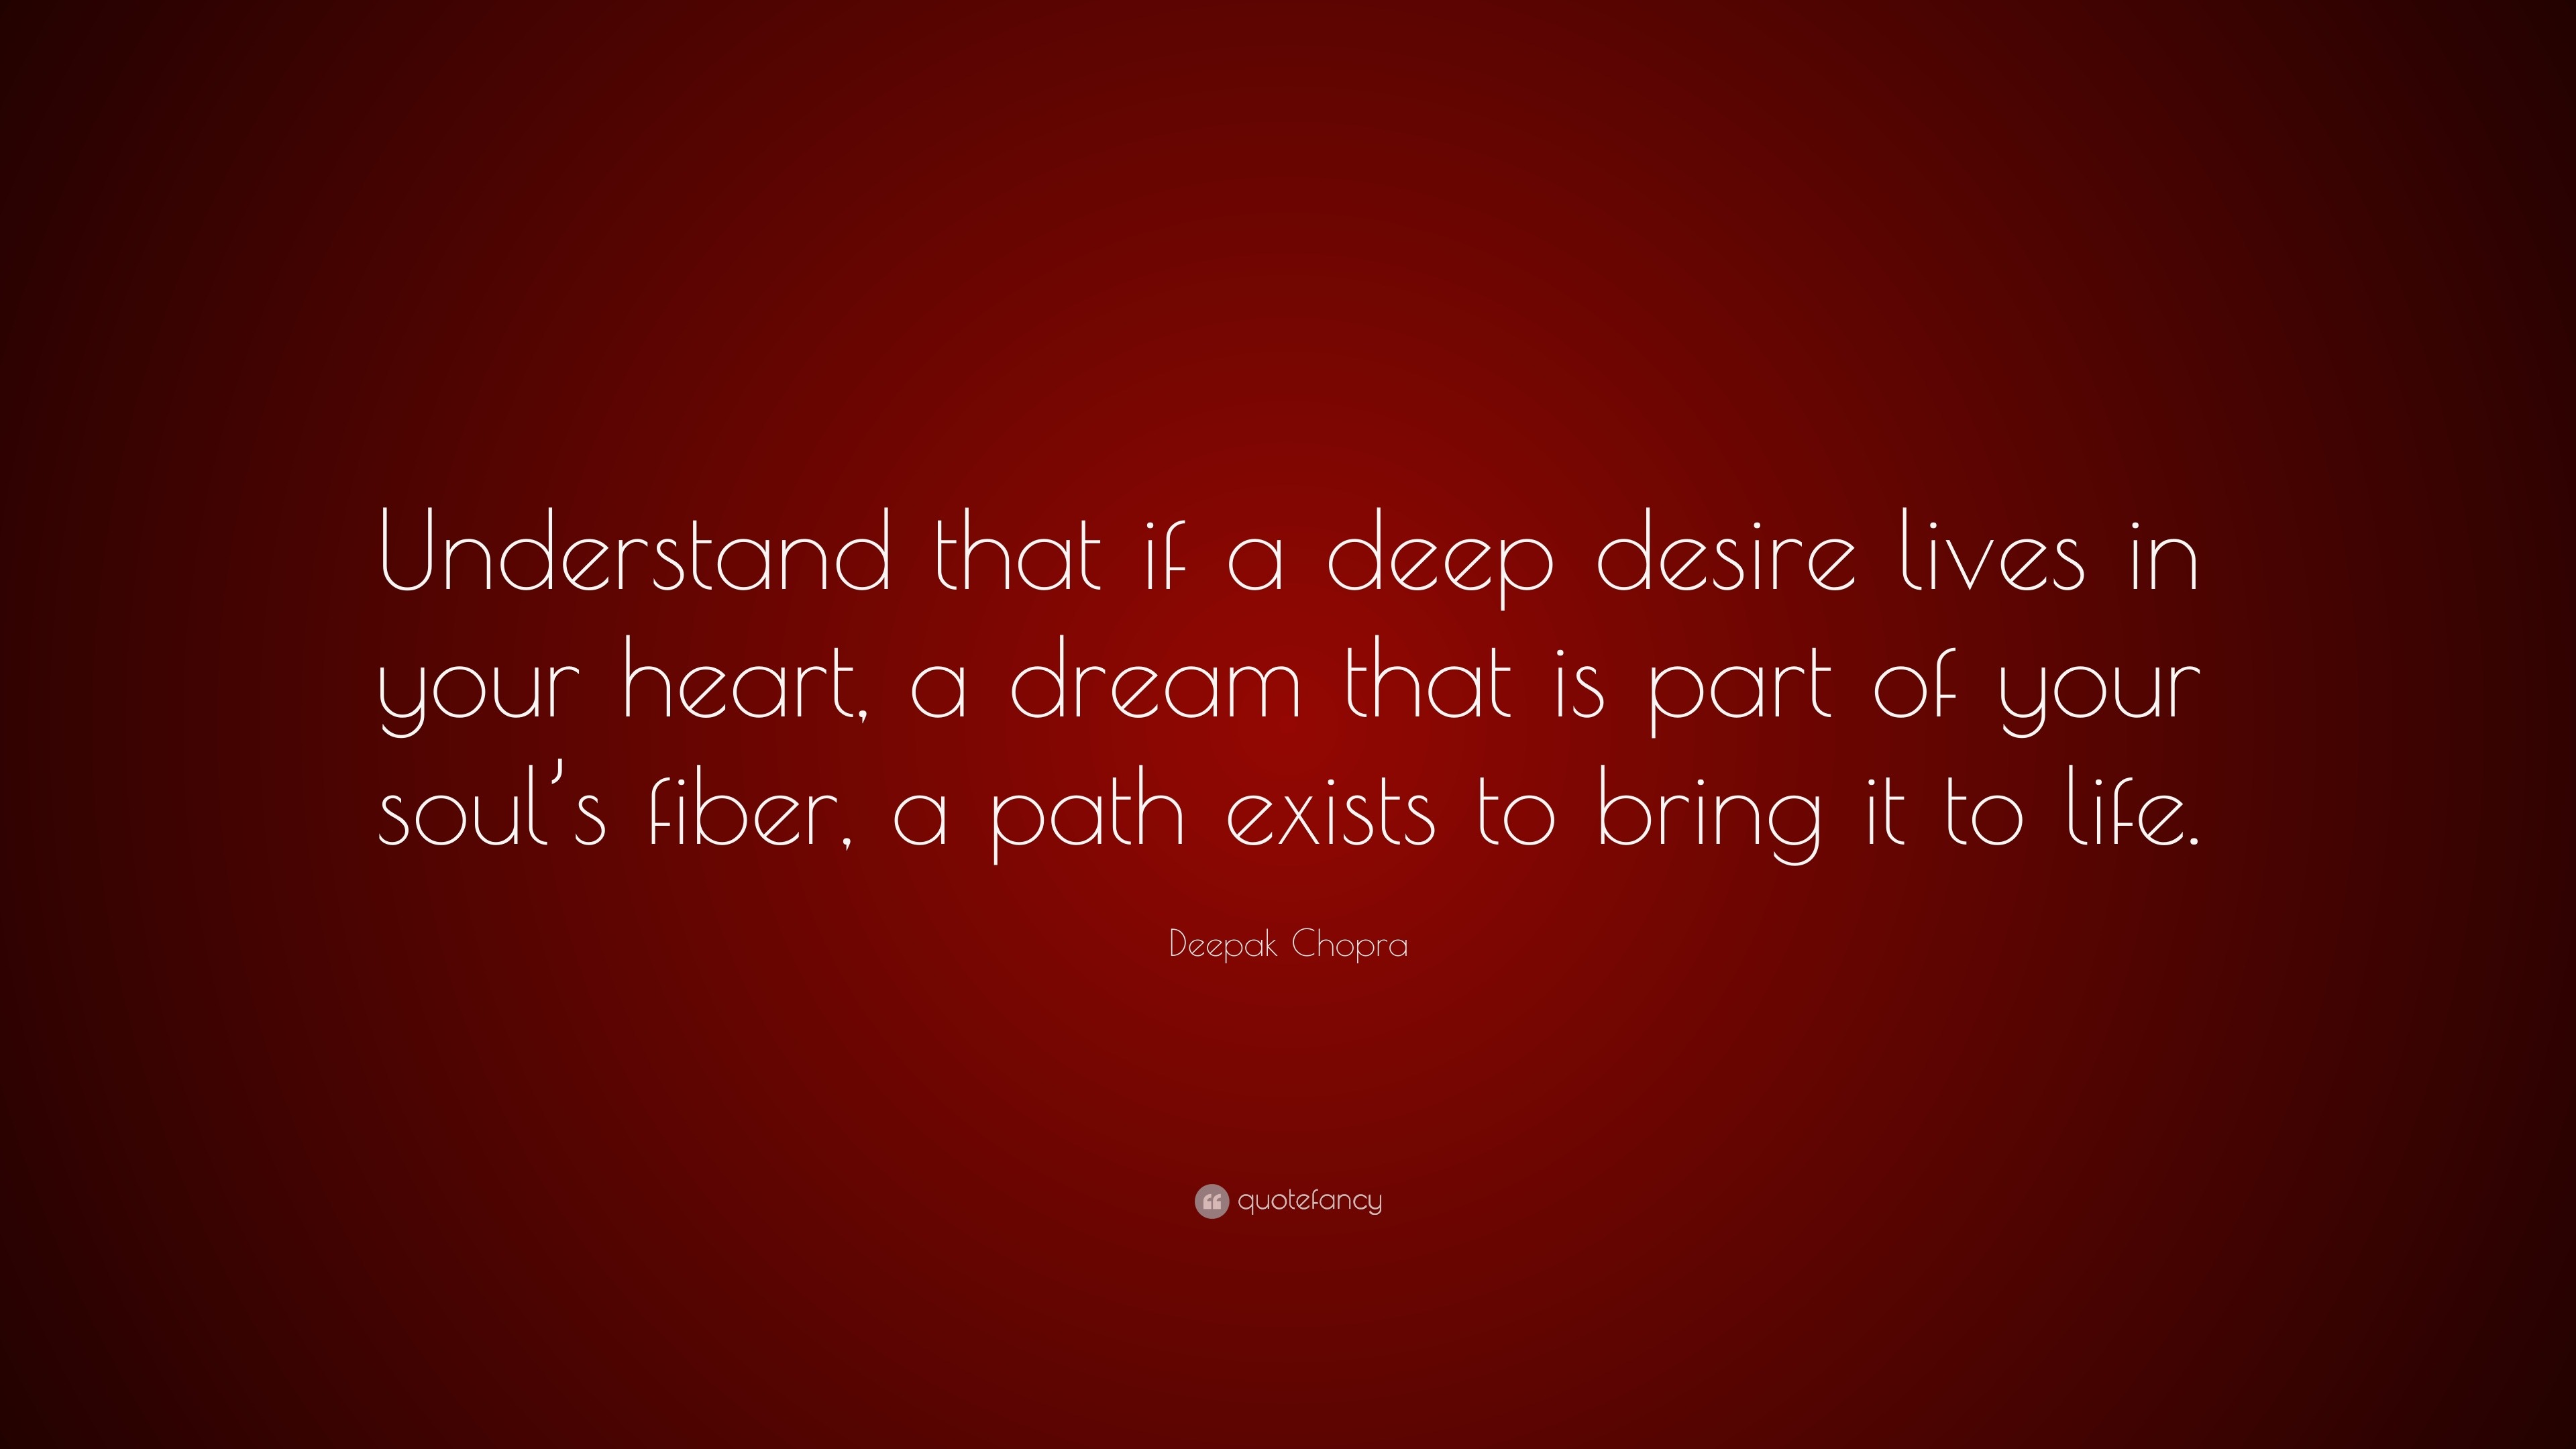 Deepak Chopra Quote Understand That If A Deep Desire Lives In Your Heart A Dream That Is Part Of Your Soul S Fiber A Path Exists To Bring